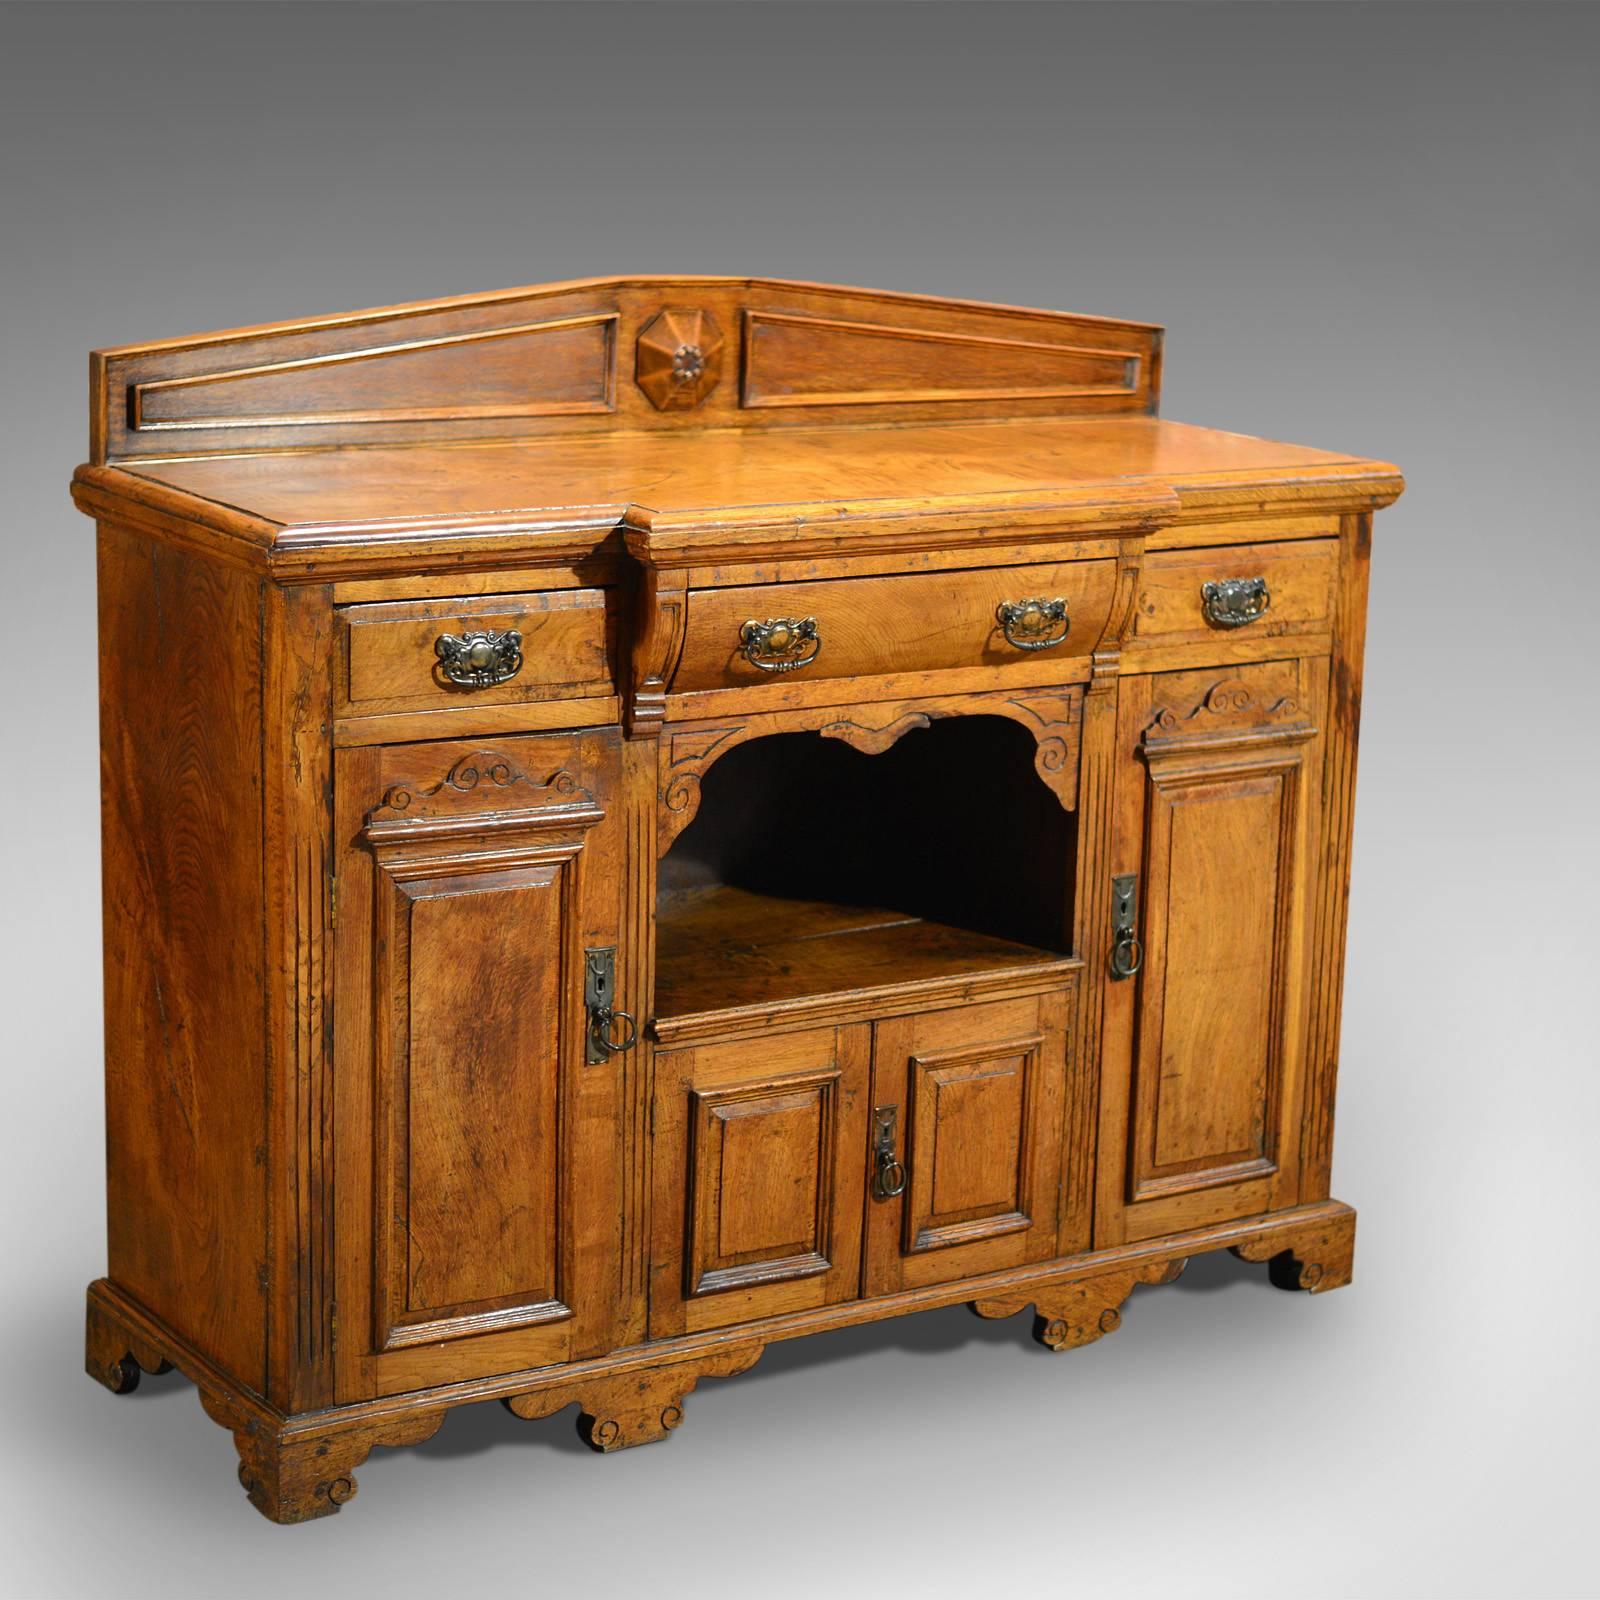 This is a small antique breakfront sideboard, circa 1900.

Expertly constructed in well figured, rustic, honey colored oak this modestly proportioned sideboard is raised on shaped bracket feet detailed with sinuous curves and carved spiraling